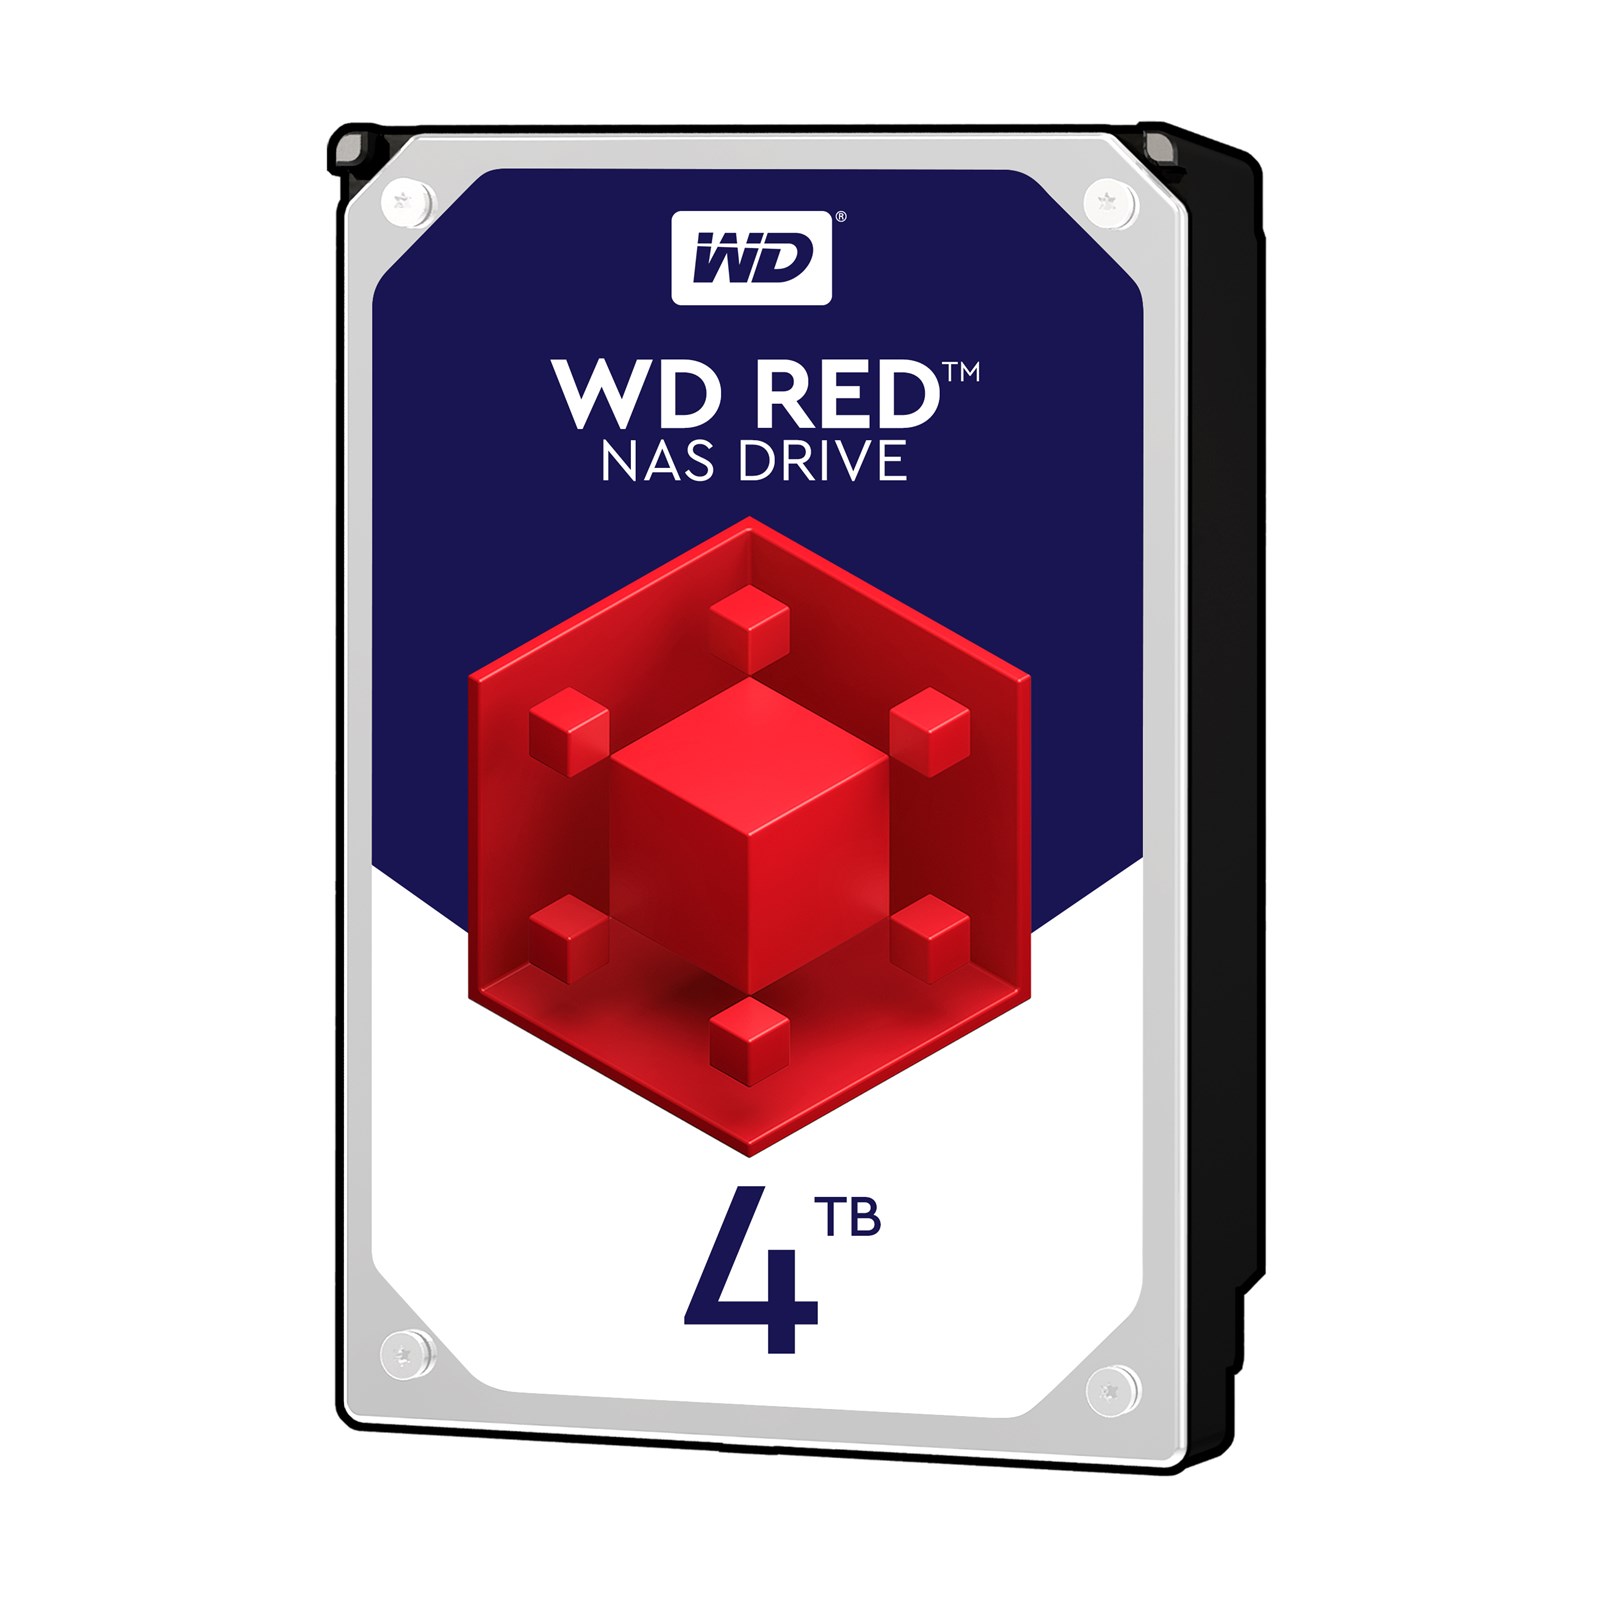 WD%20RED%204TB%205400RPM%2064MB%20SATA3%206Gbit/sn%20WD40EFRX%20NAS%20HDD